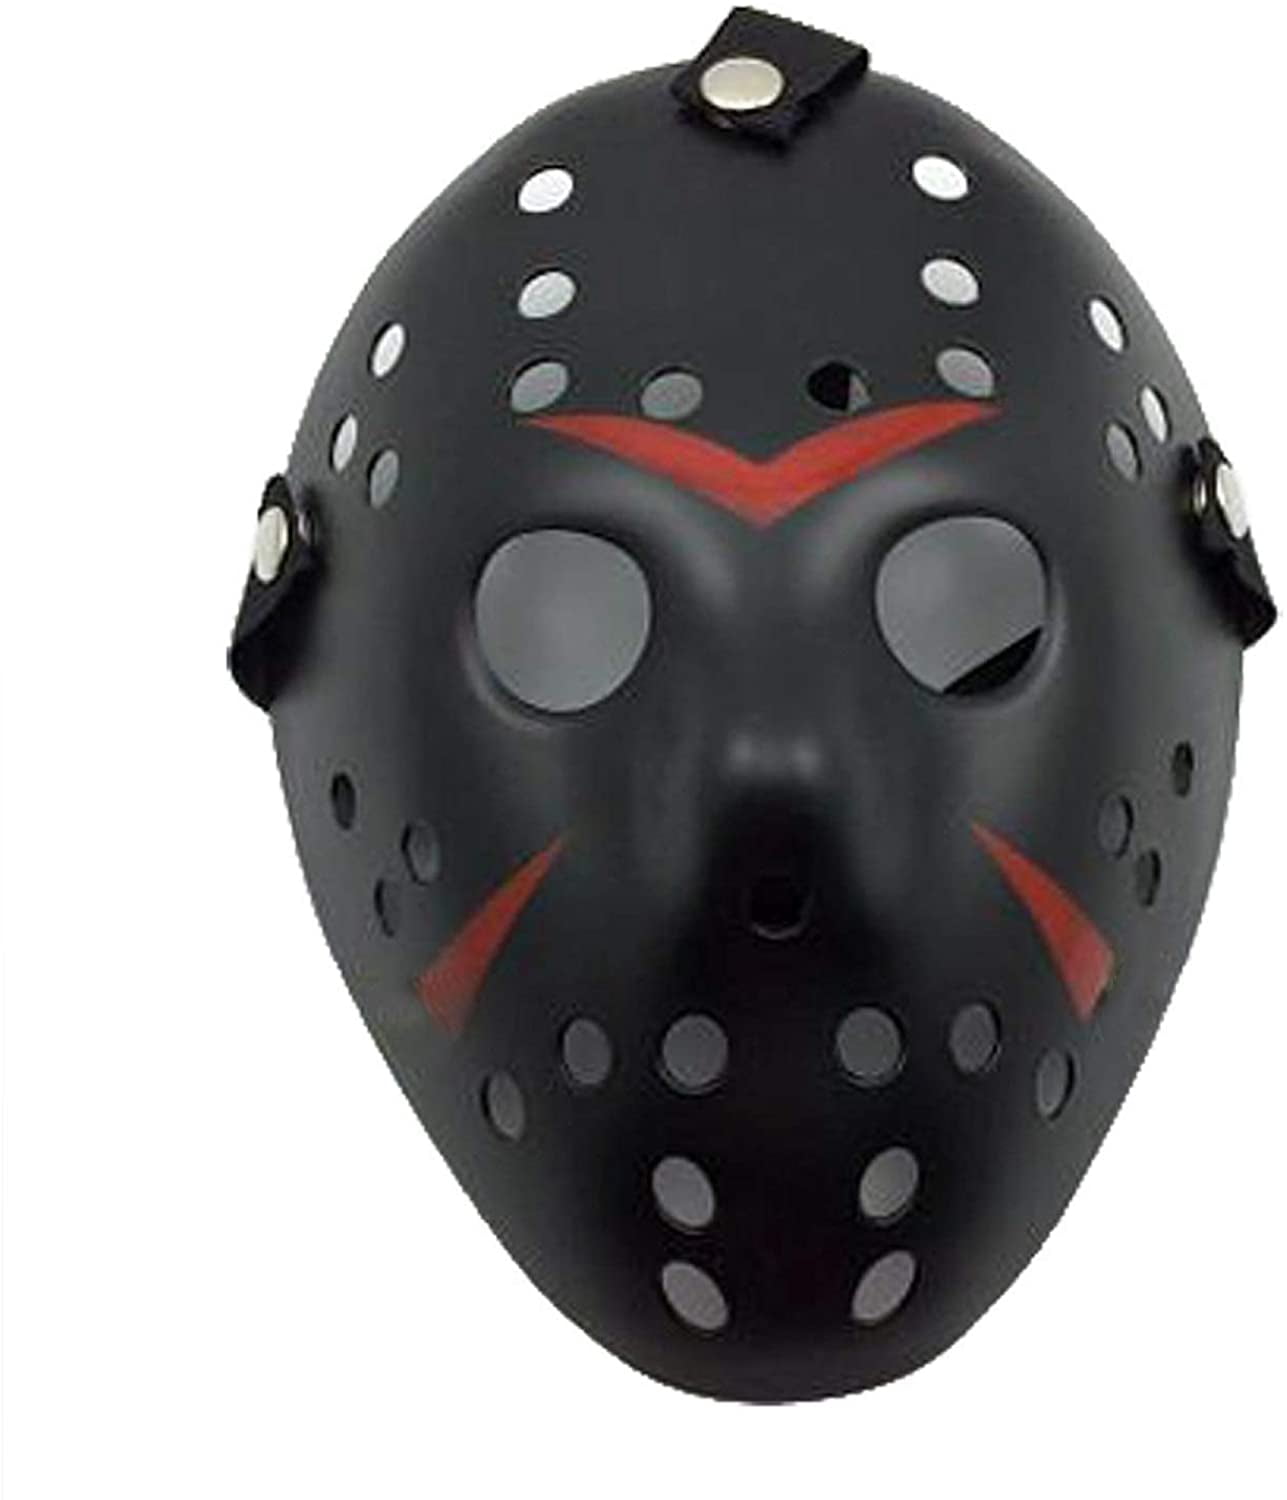 Scary Halloween Painted Hockey Mask Fancy Dress Costume Accessory 